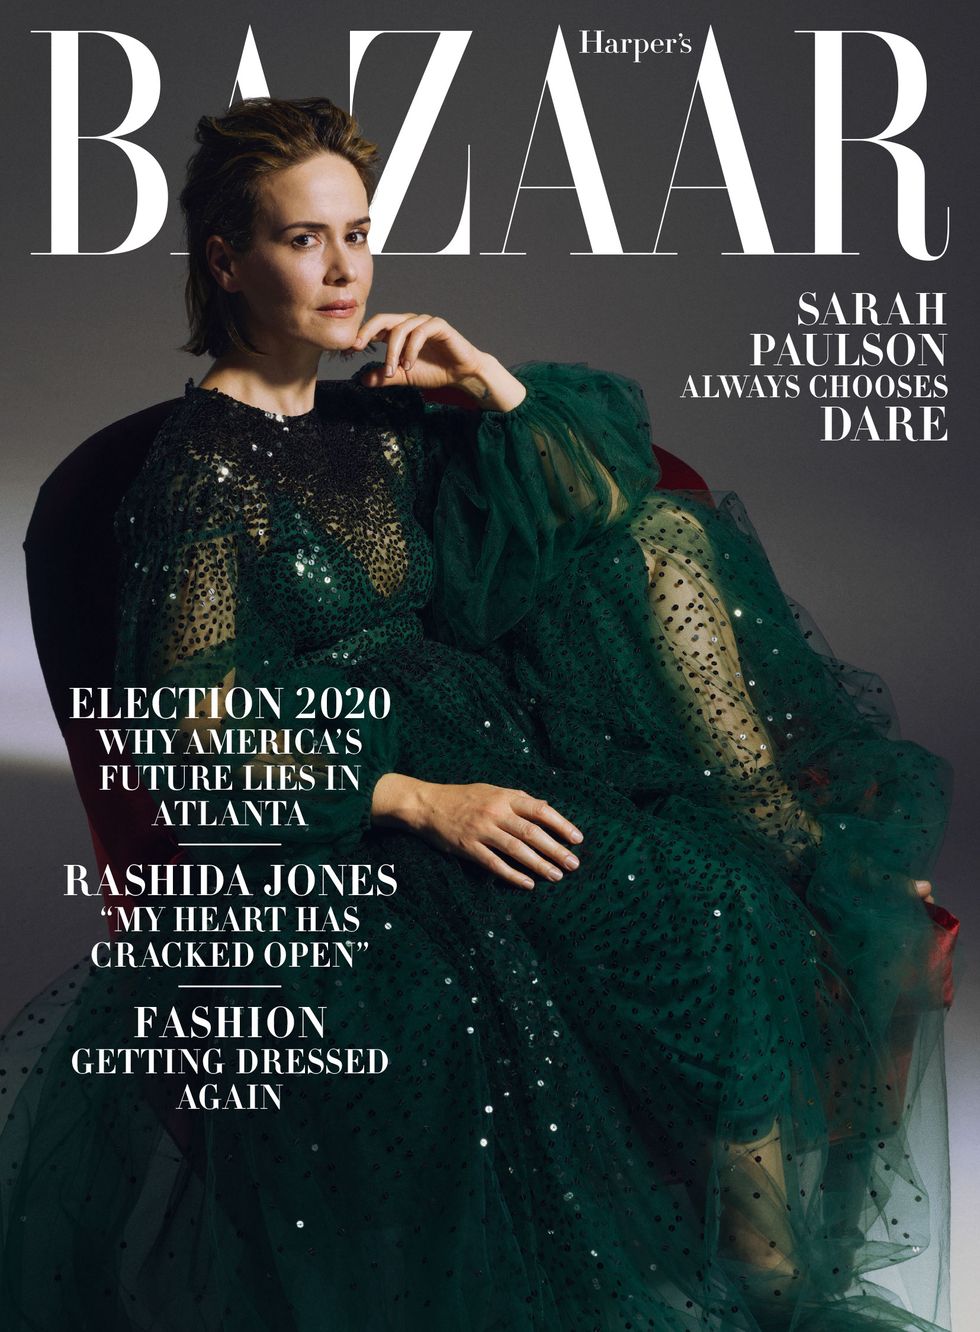 The 53 Most Memorable Magazine Covers of 2020 - Fashionista